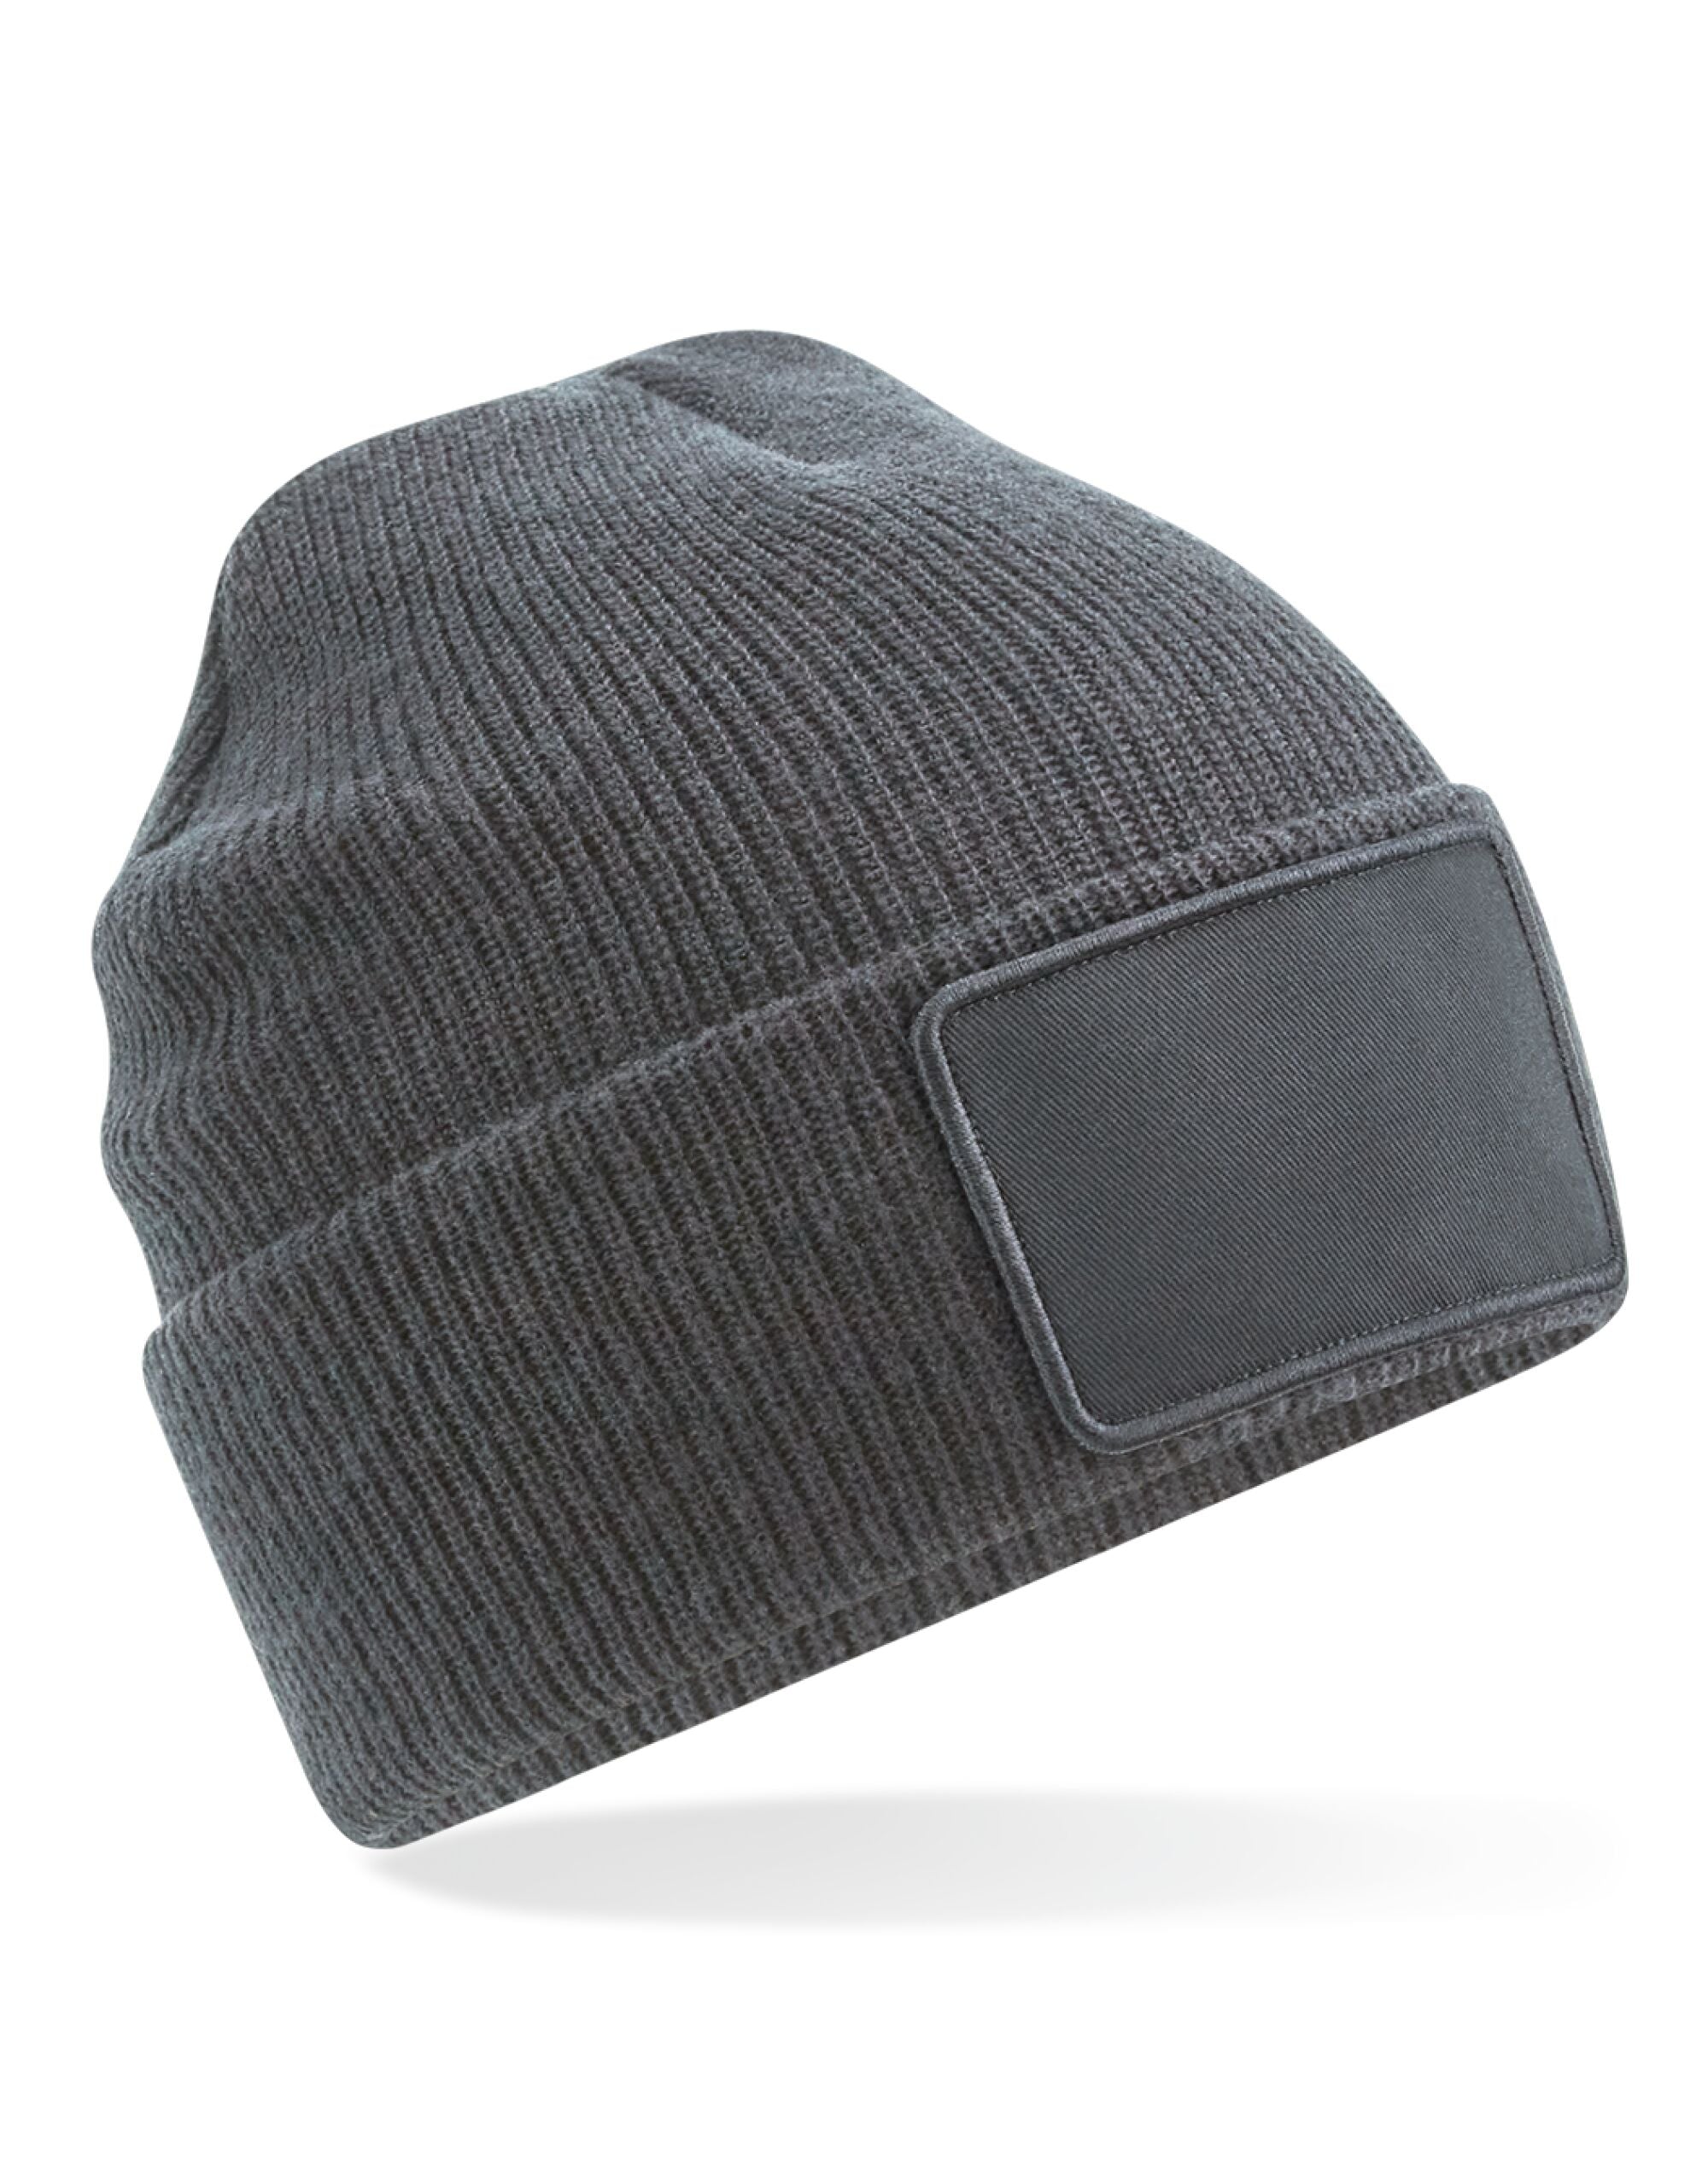 Beechfield Removable Patch Beanie